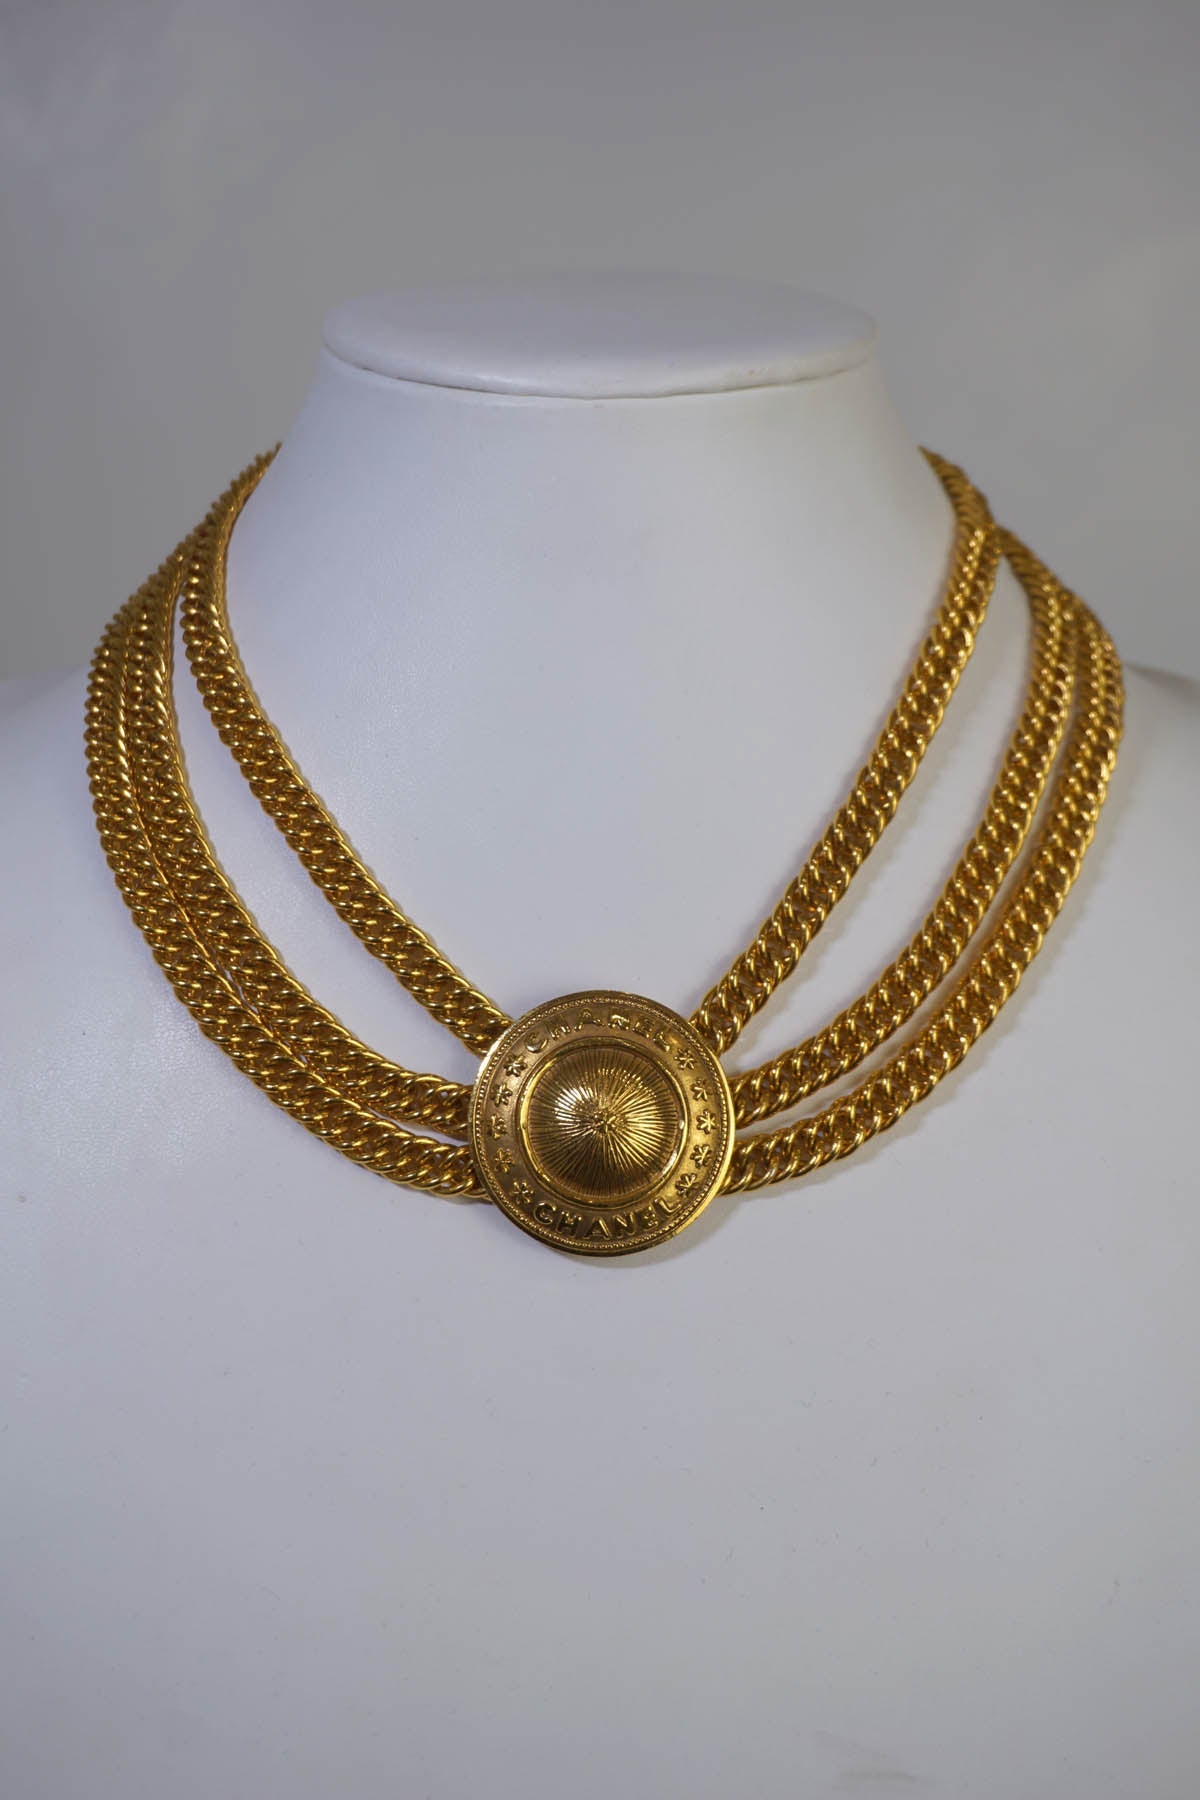 Chanel Vintage 3 Chain Medallion Choker Necklace 1990's